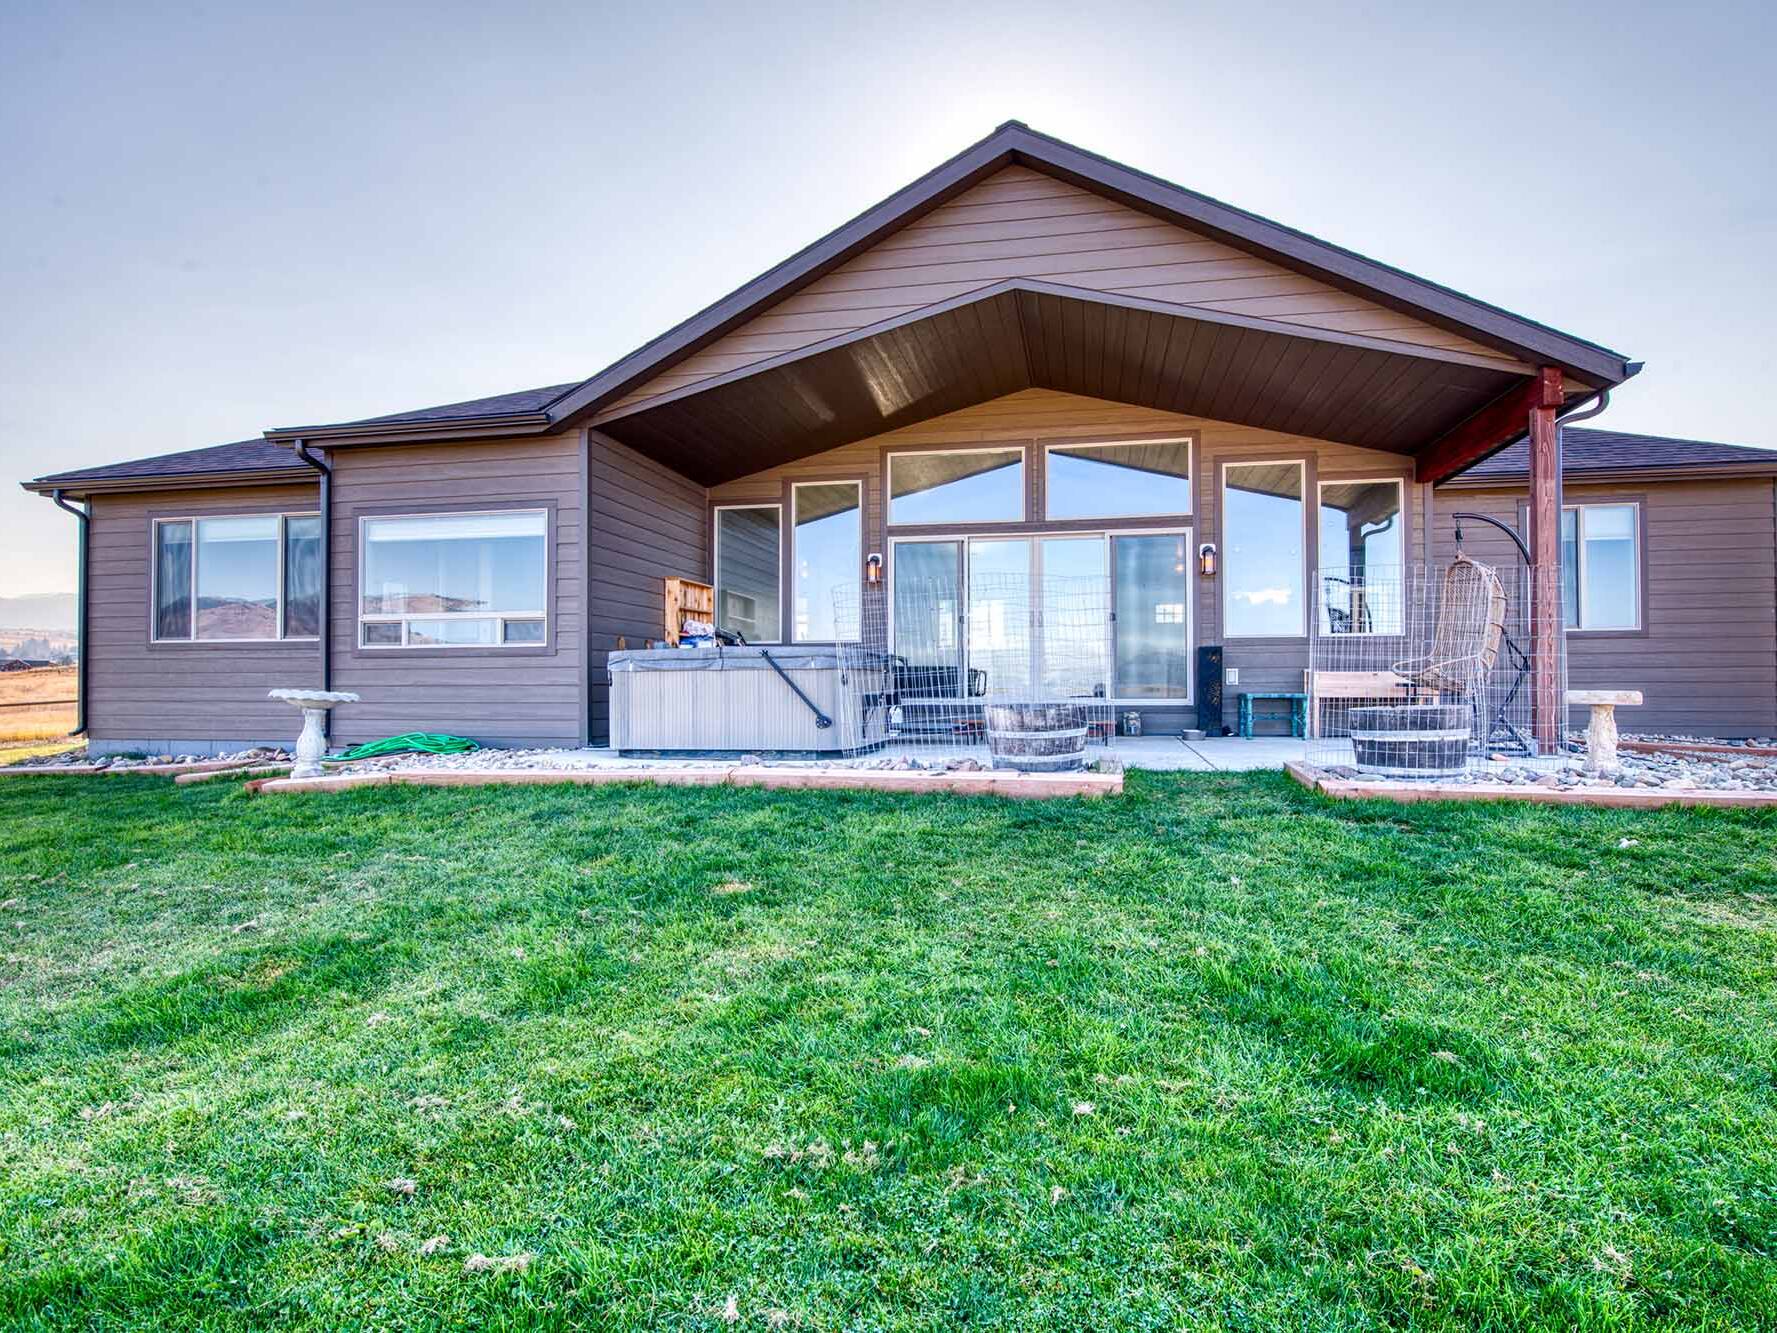 House exterior of The Copper Creek model home - Built by Big Sky Builder in Florence, MT